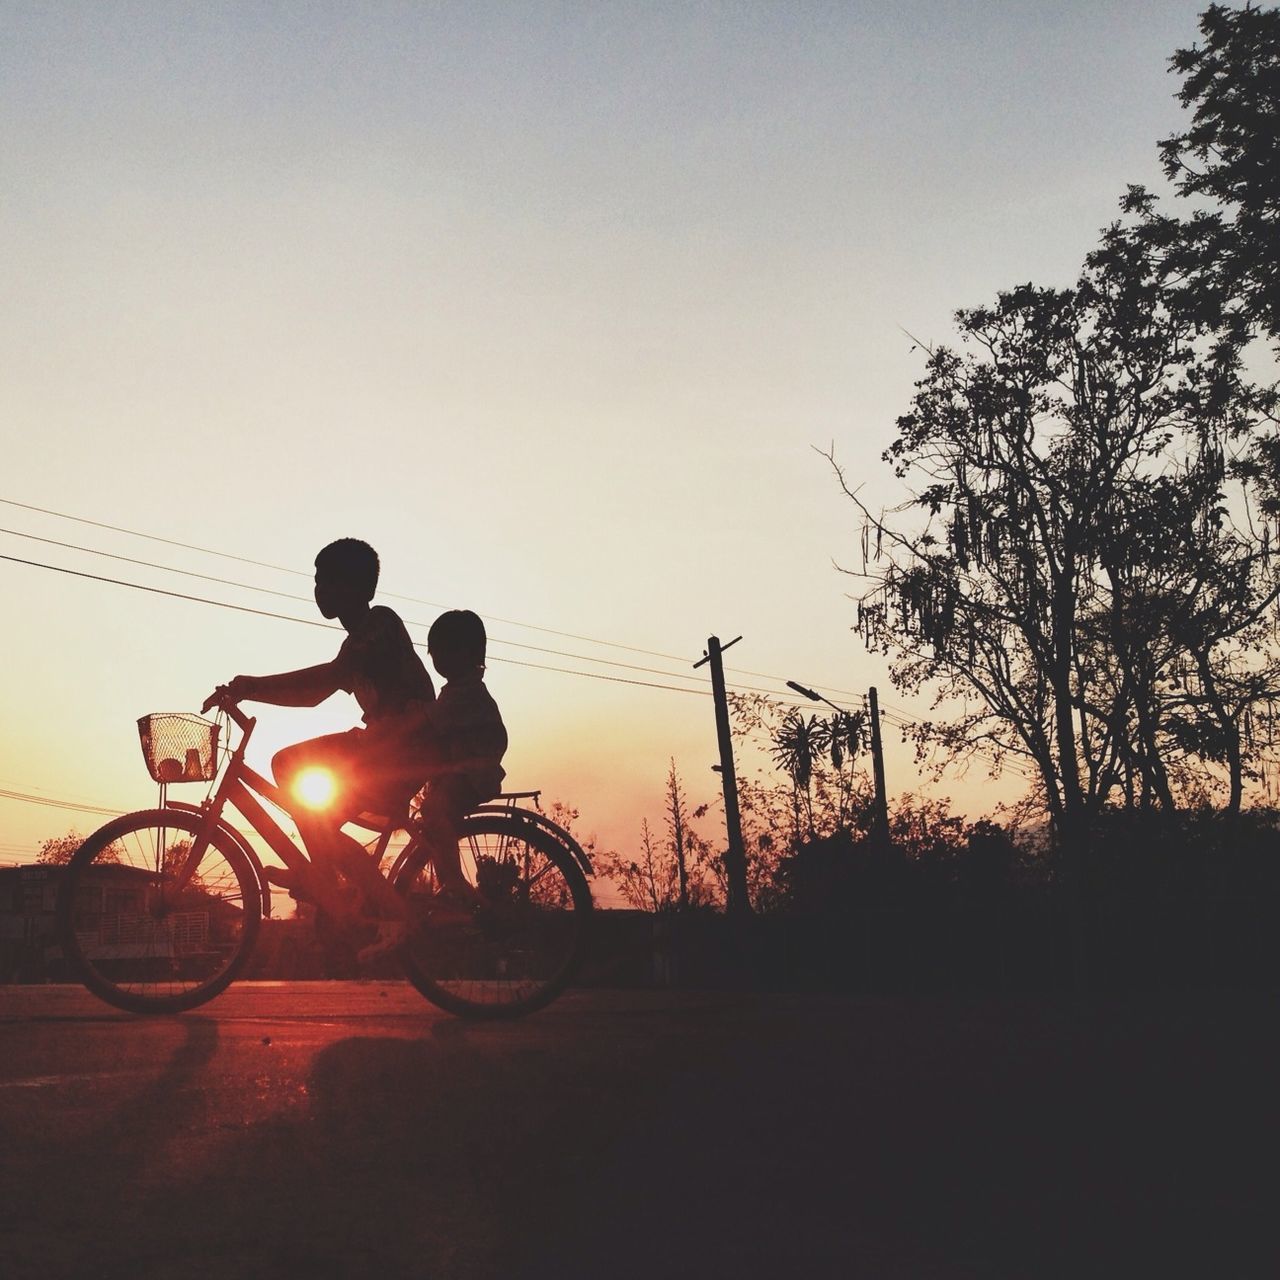 SILHOUETTE OF MAN RIDING BICYCLE AT SUNSET